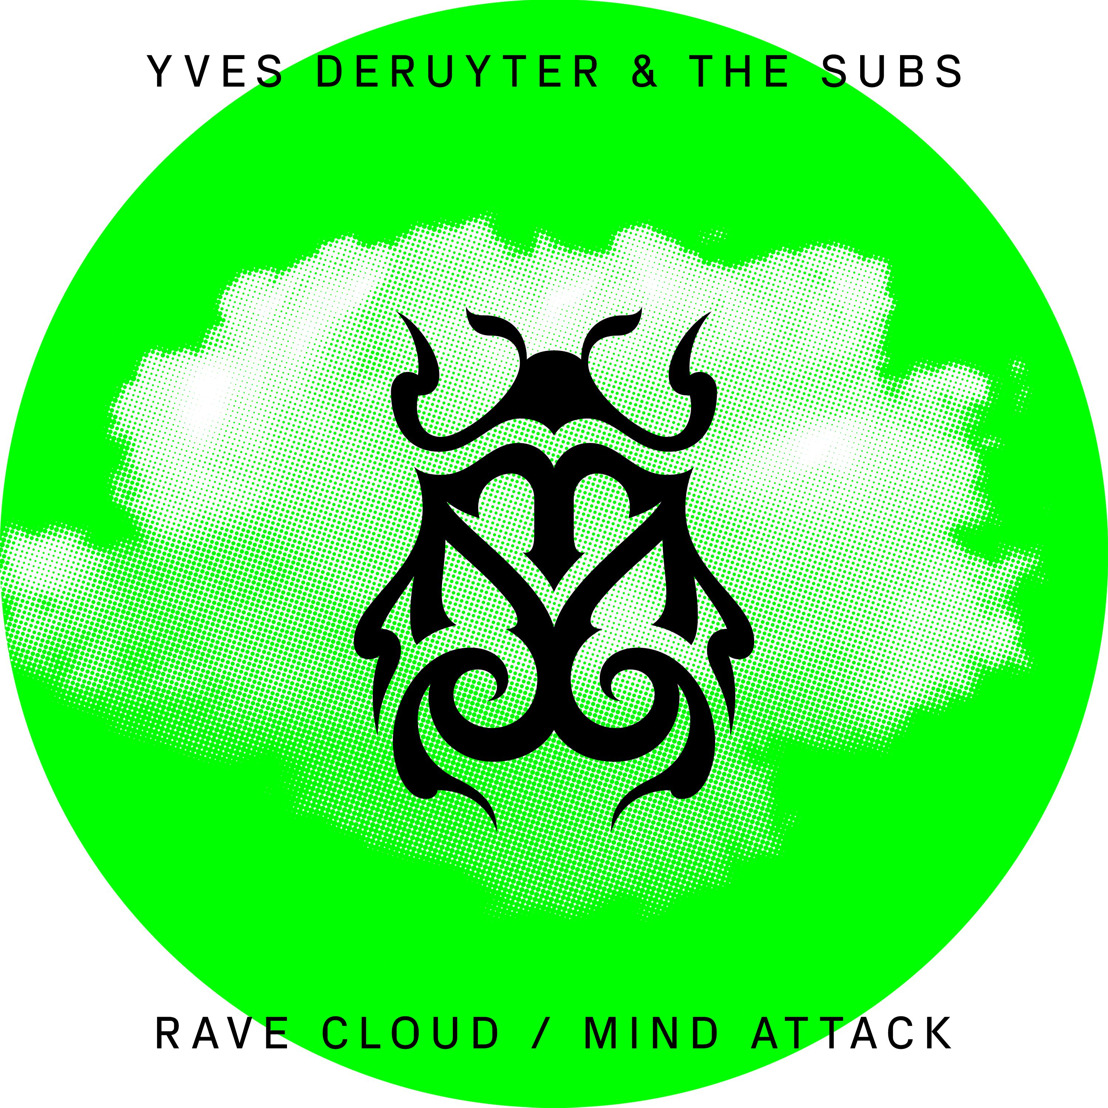 Yves Deruyter and The Subs join forces for a hard-hitting Belgian techno rave banger